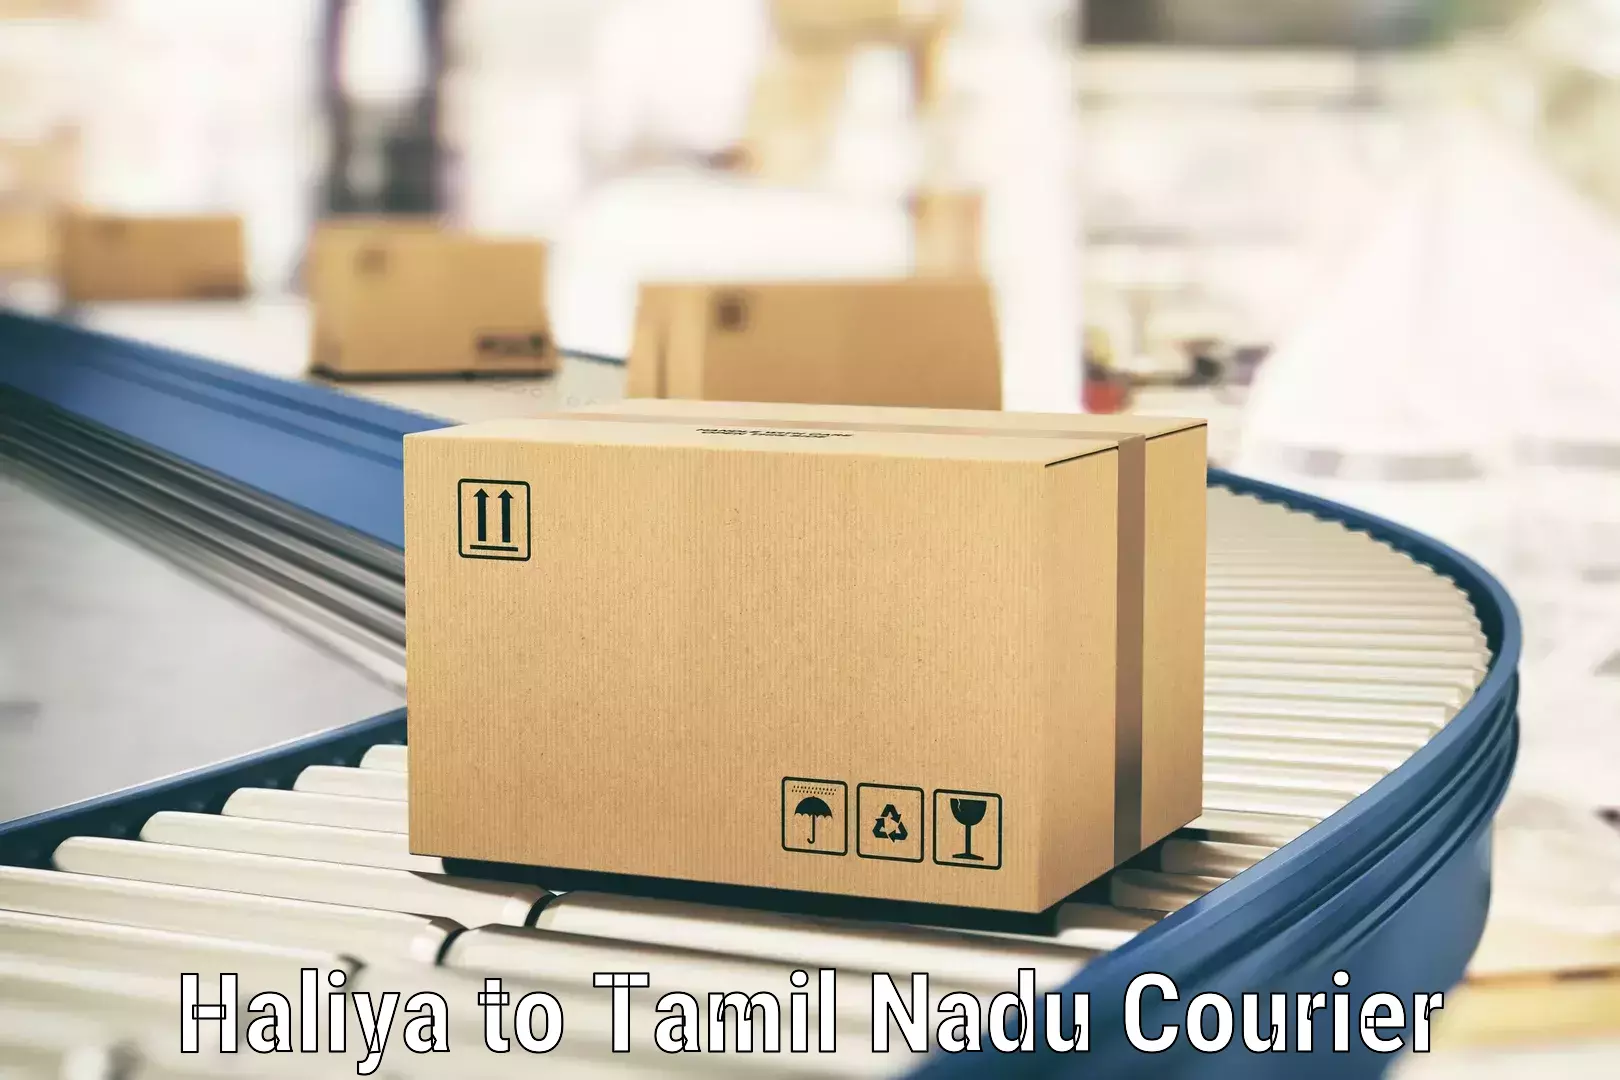 Full-service courier options Haliya to Trichy